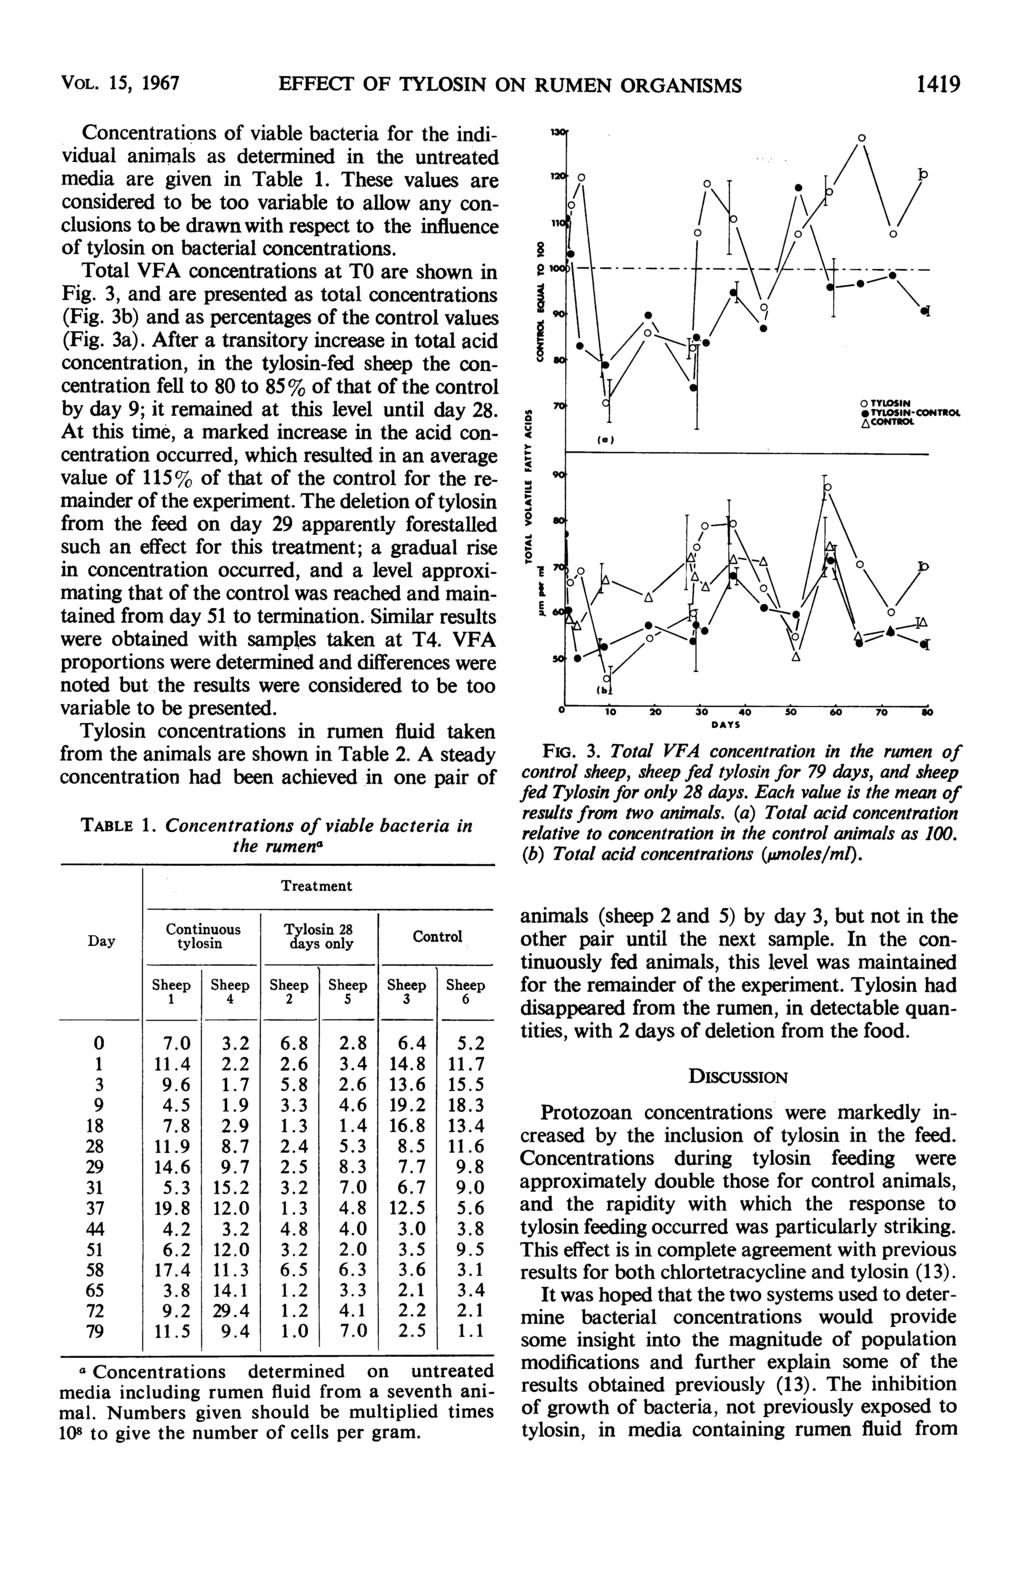 VOL. 15, 1967 EFFECT OF TYLOSIN ON RUMEN ORGANISMS 1419 Concentrations of viable bacteria for the individual animals as determined in the untreated media are given in Table 1.